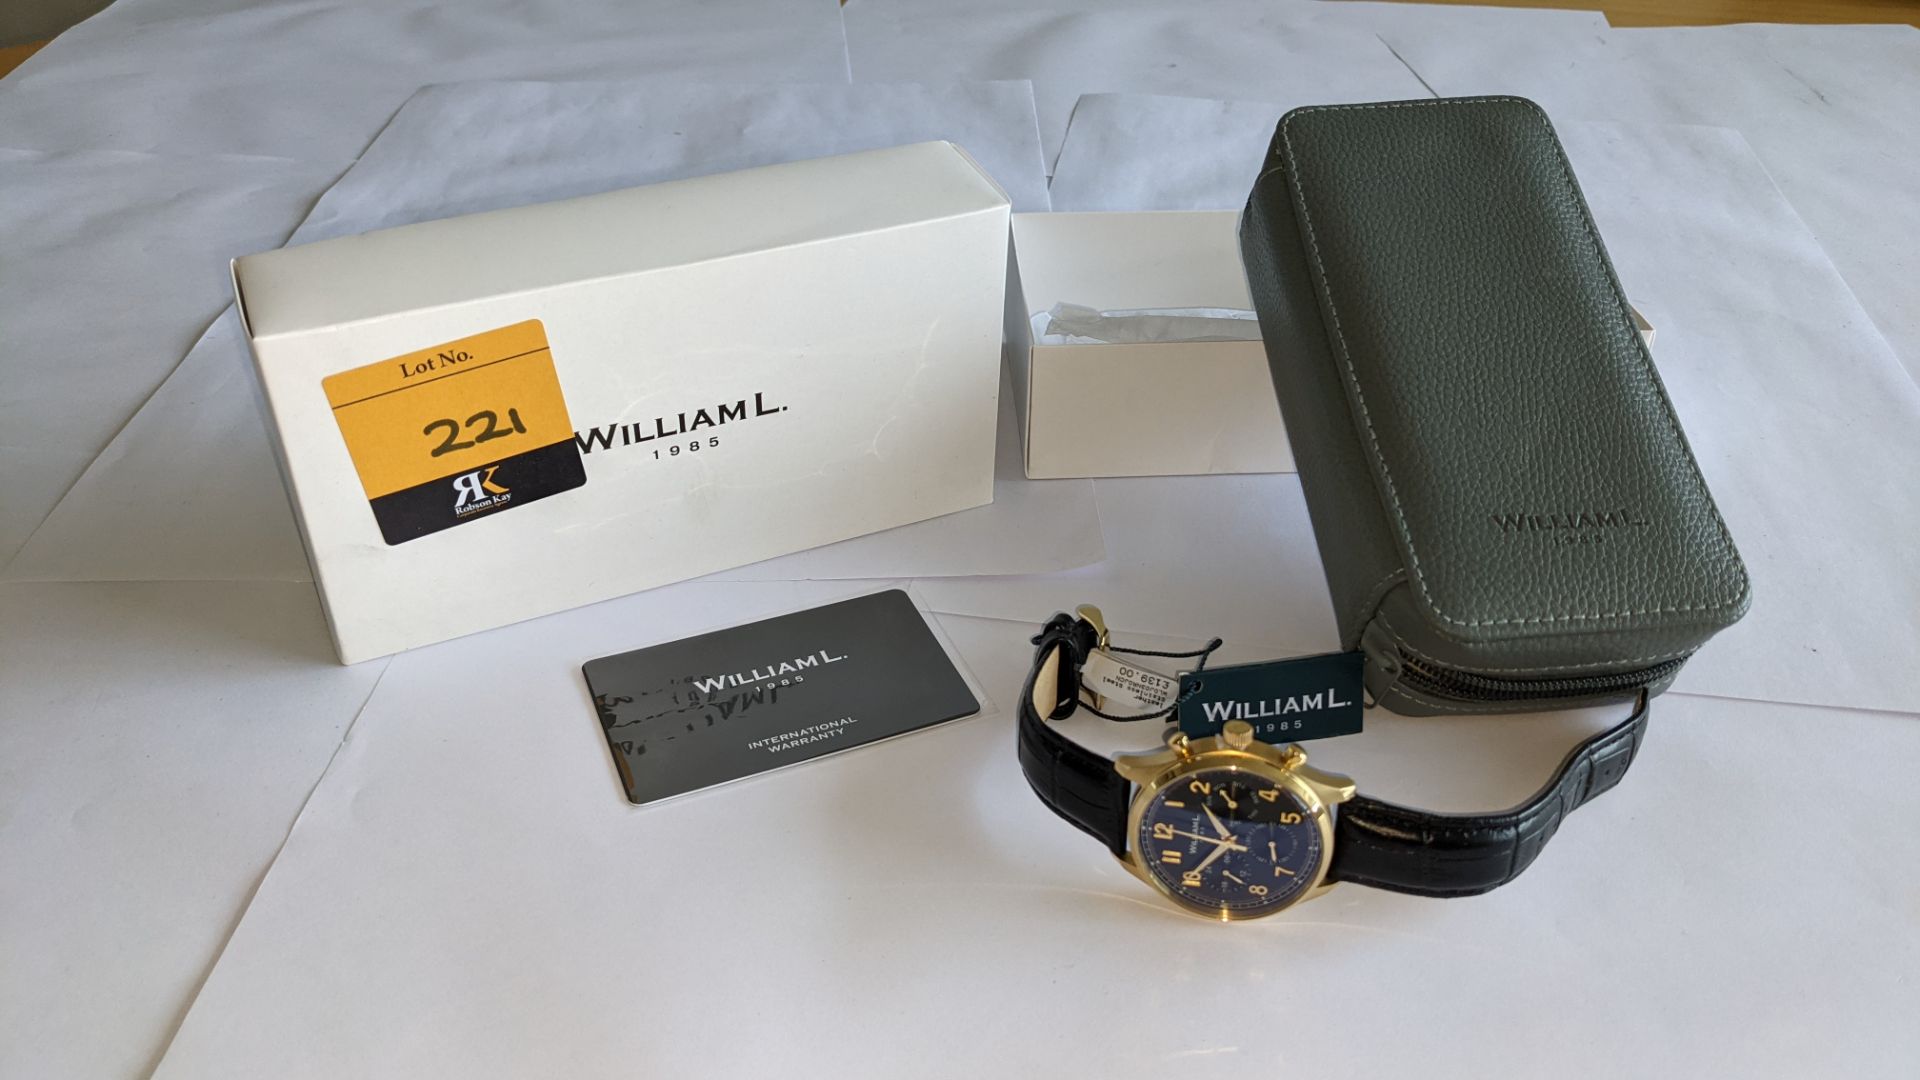 William L 1985 stainless steel watch, 5 ATM water resistant, leather strap, RRP £139. Includes box - Image 2 of 15